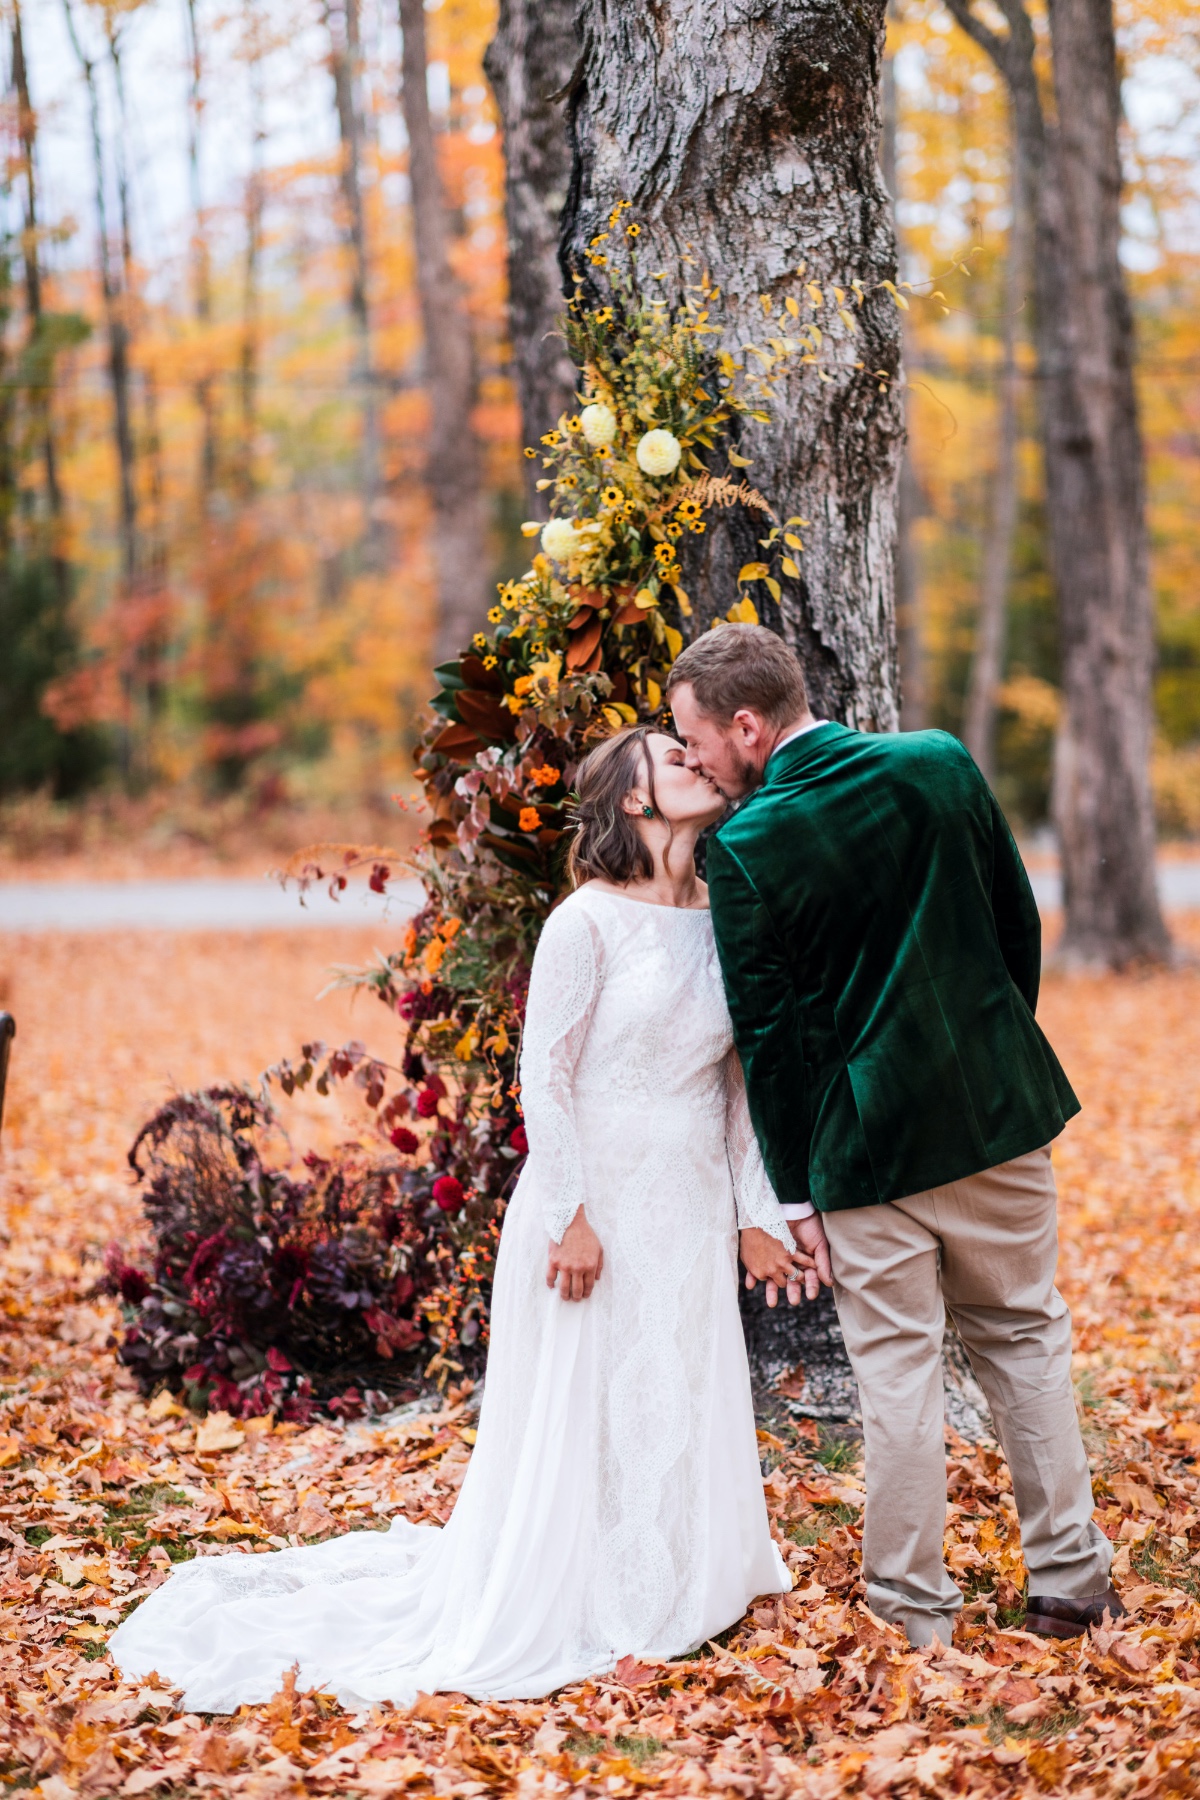 first wedding look amongst the fall leaves